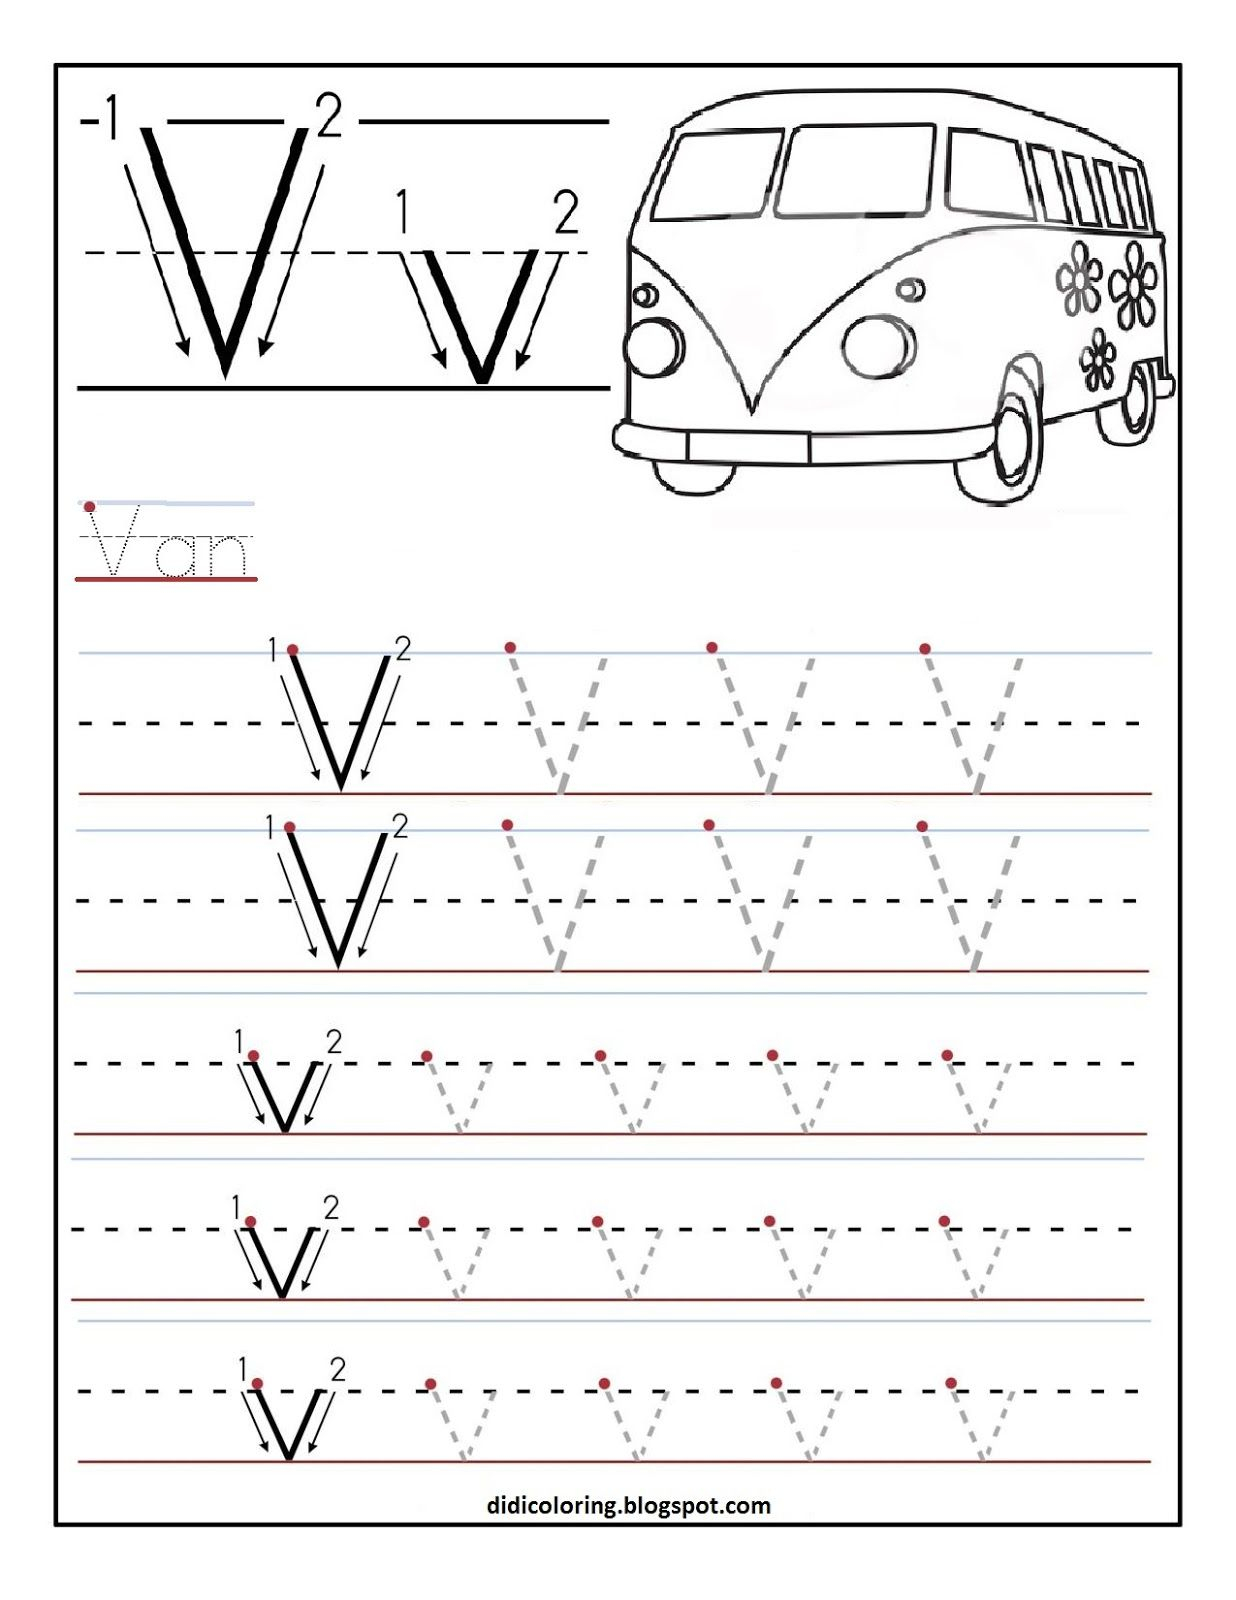 Free Printable Worksheet Letter V For Your Child To Learn